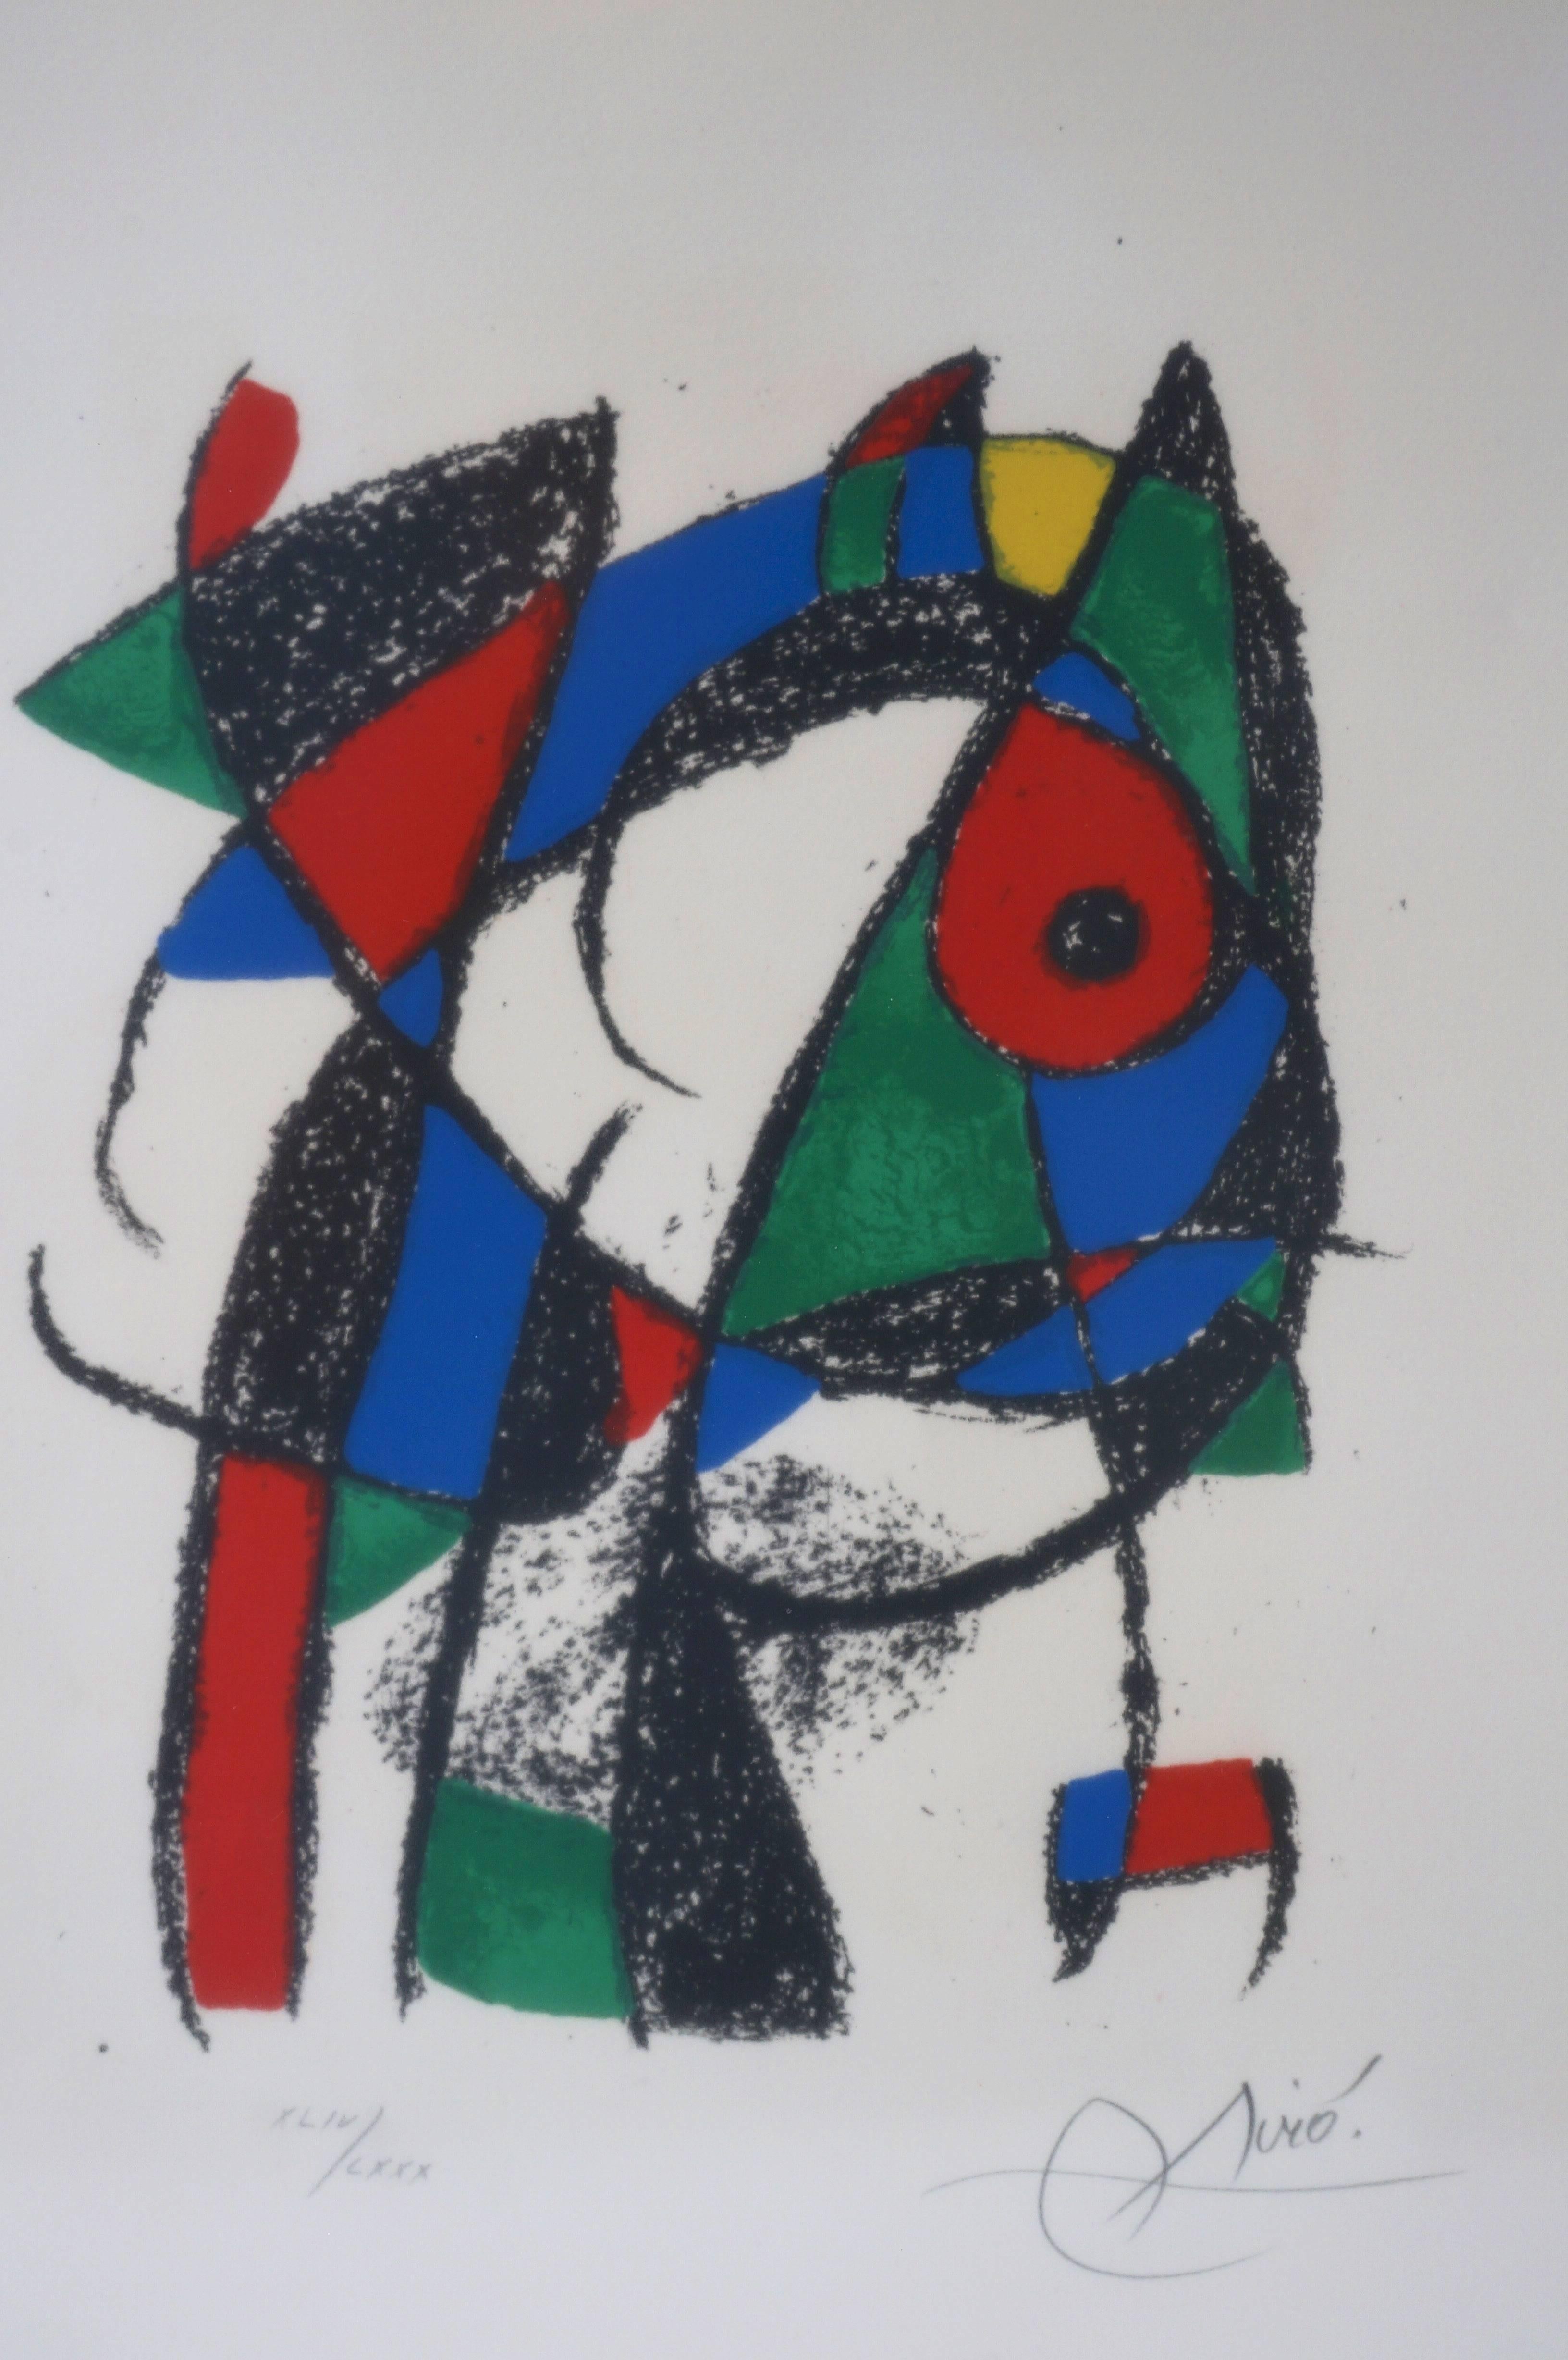 This Miro Lithograph has been professionally framed with archival materials.

Note: Paper size is 17